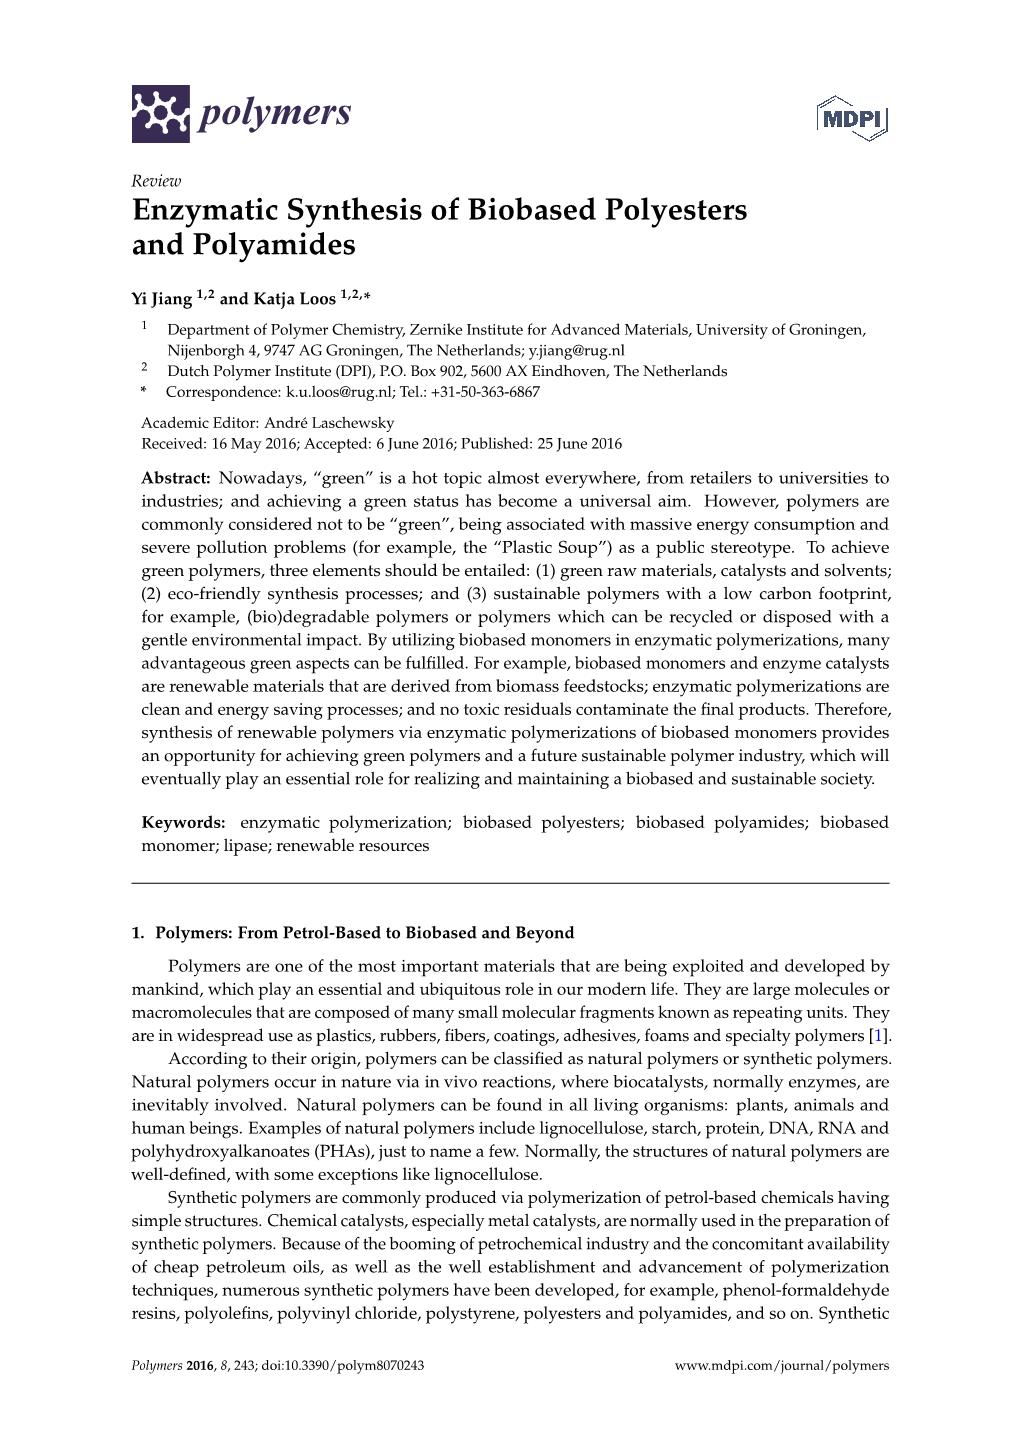 Enzymatic Synthesis of Biobased Polyesters and Polyamides